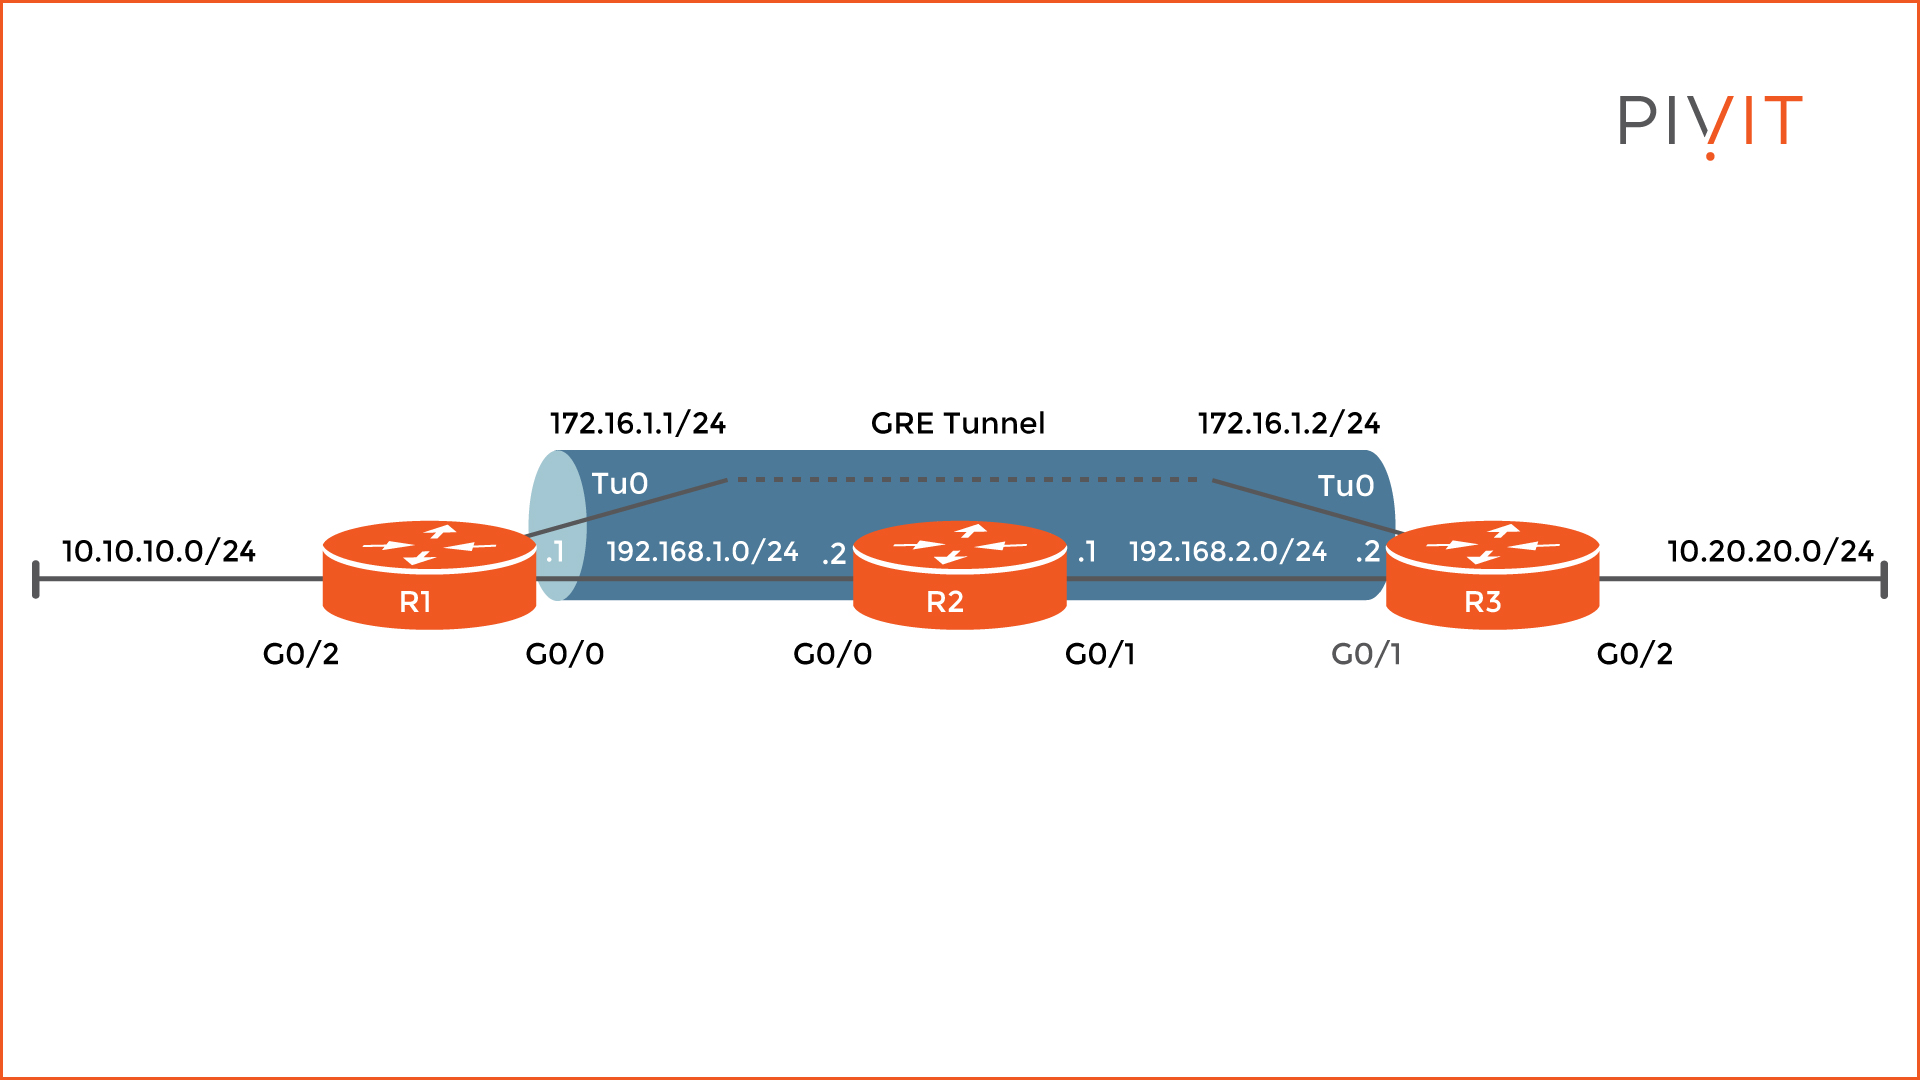 GRE tunnel topology configuration between routers R1 and R3